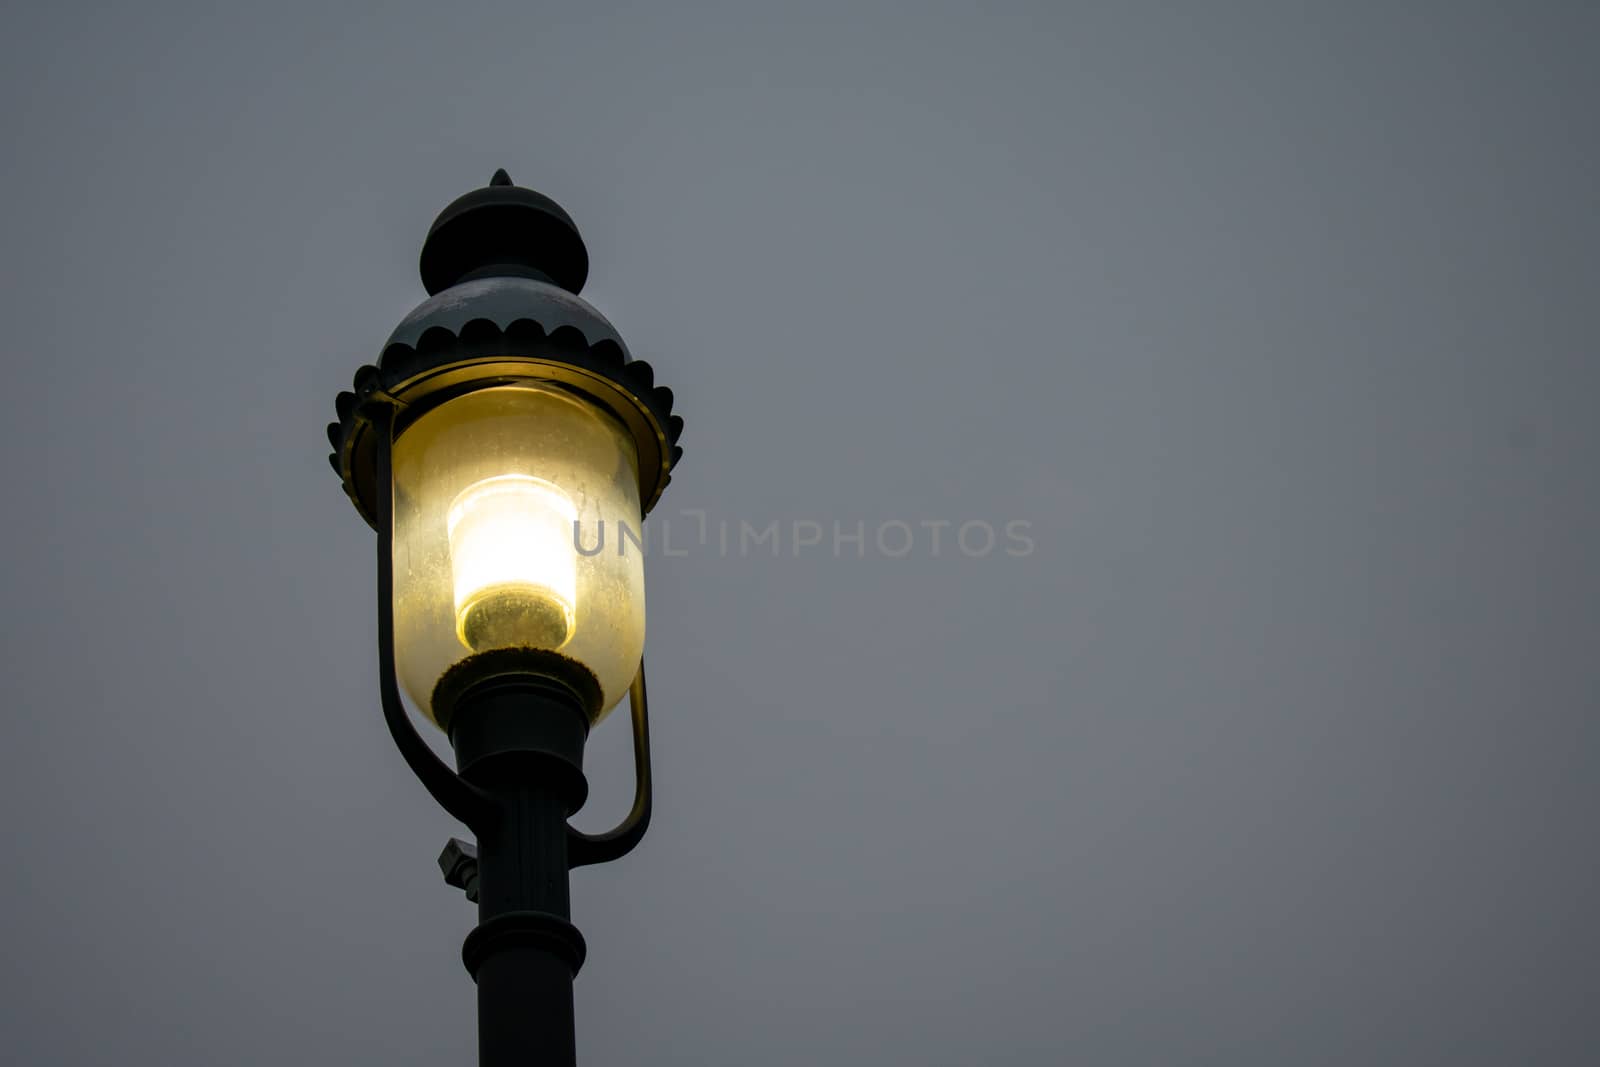 An Old Fashioned Black Metal Street Lamp on a Gray Overcast Sky